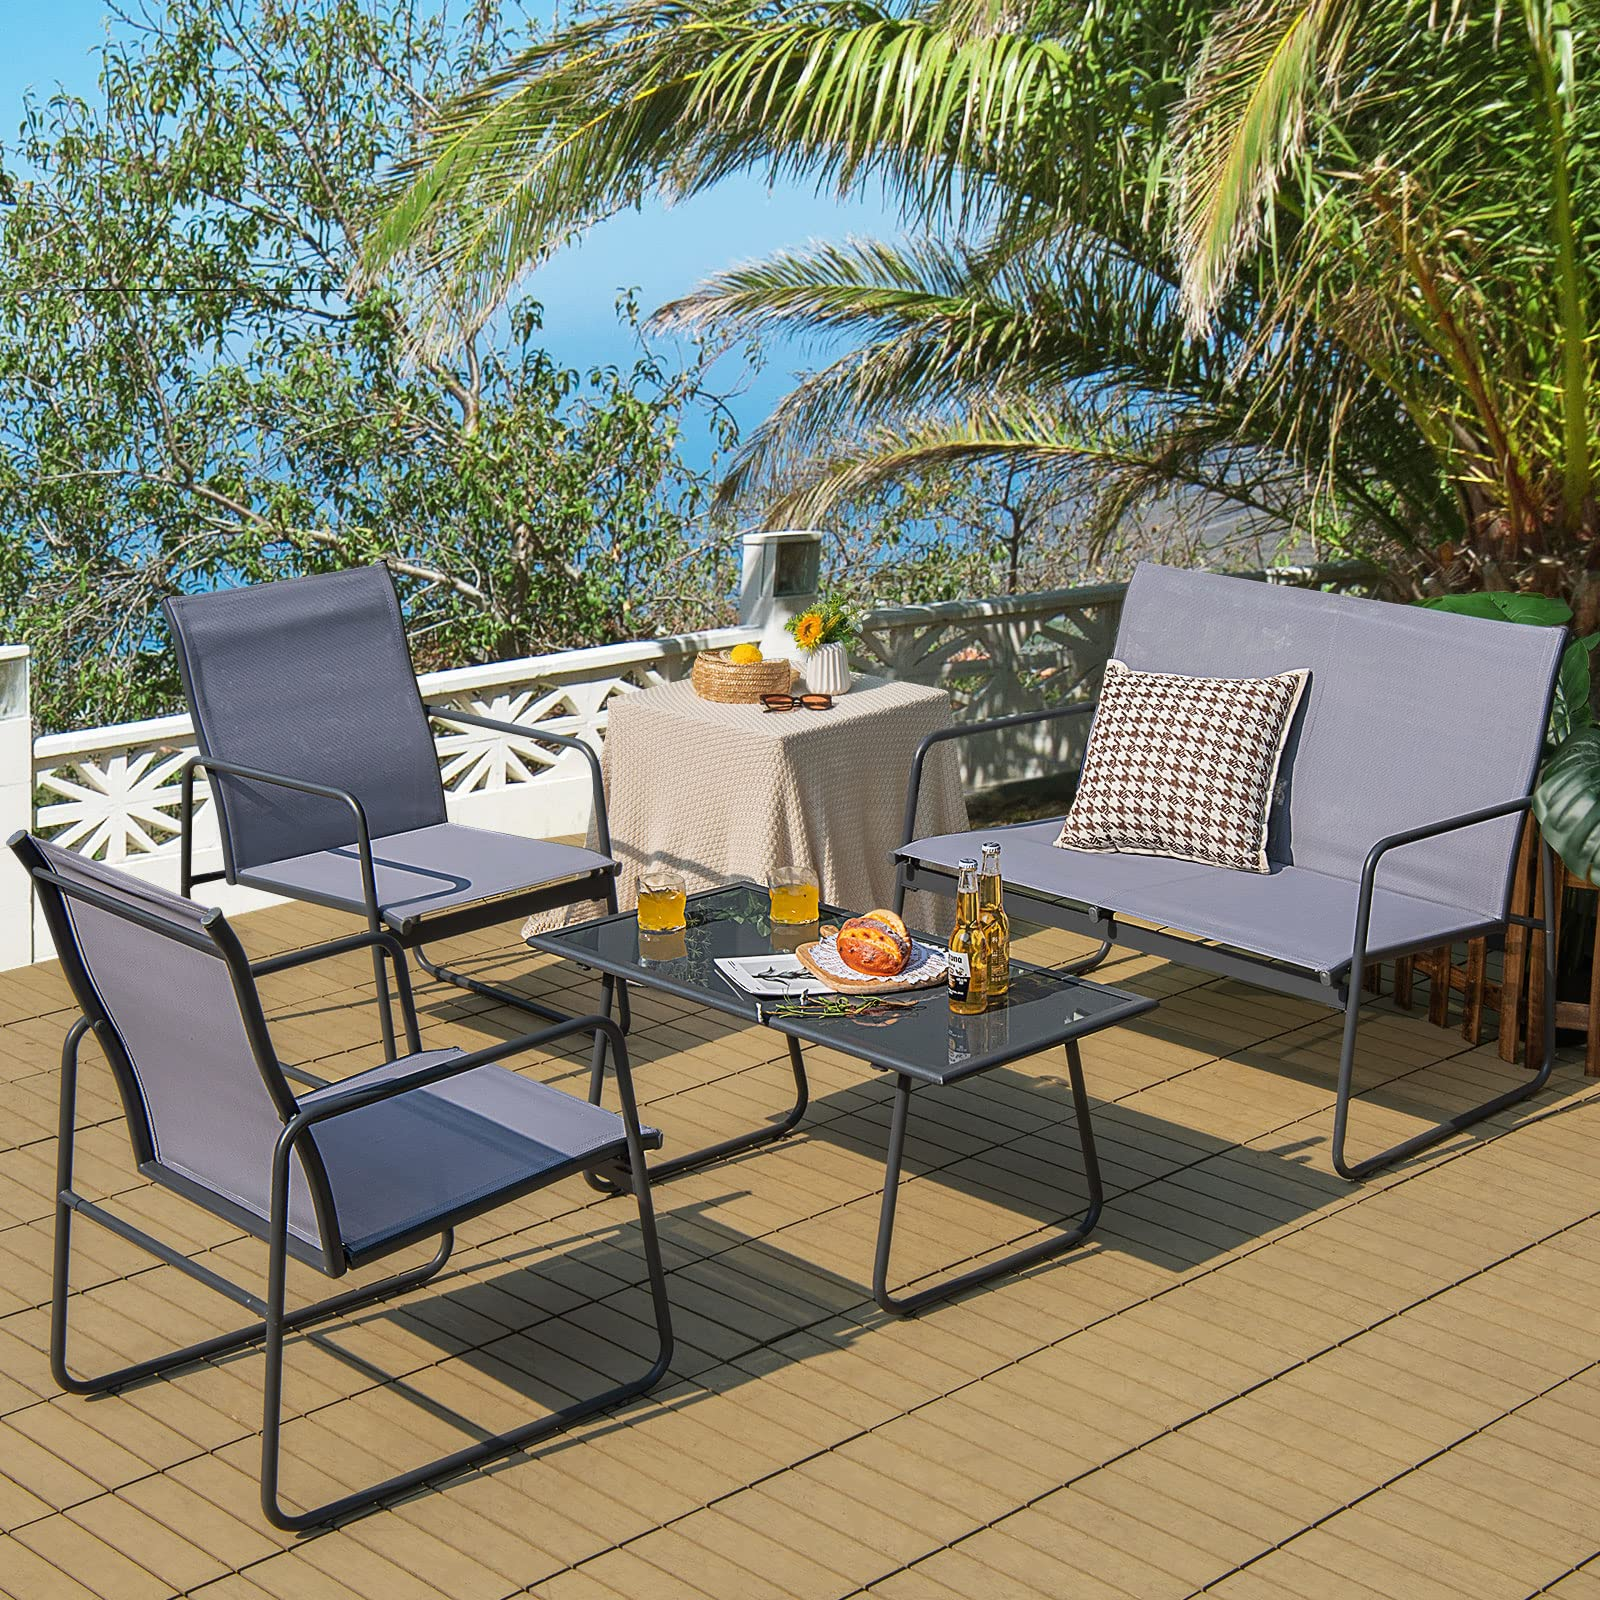 How To Maintain Your Outdoor Steel & Aluminum Furniture